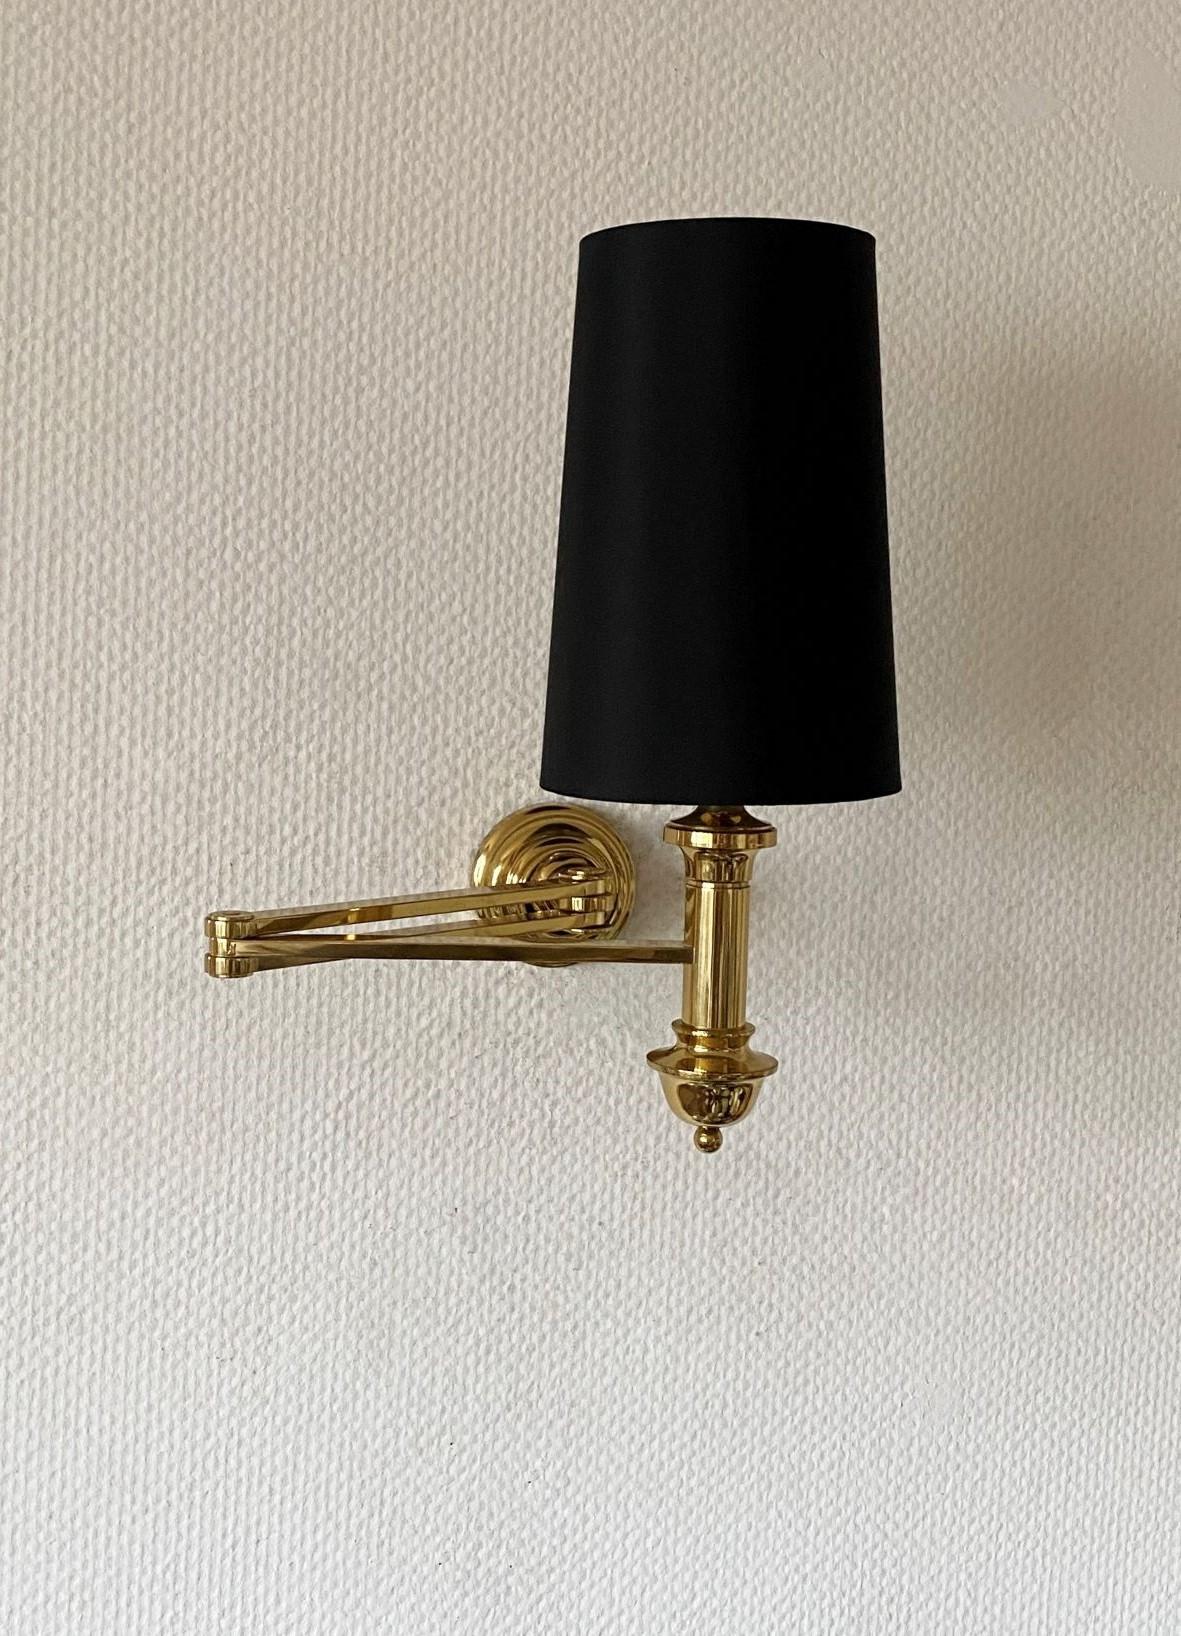 Pair of Maison Jansen Style Brass Swing Arm Wall Sconces Lights, 1960s For Sale 6